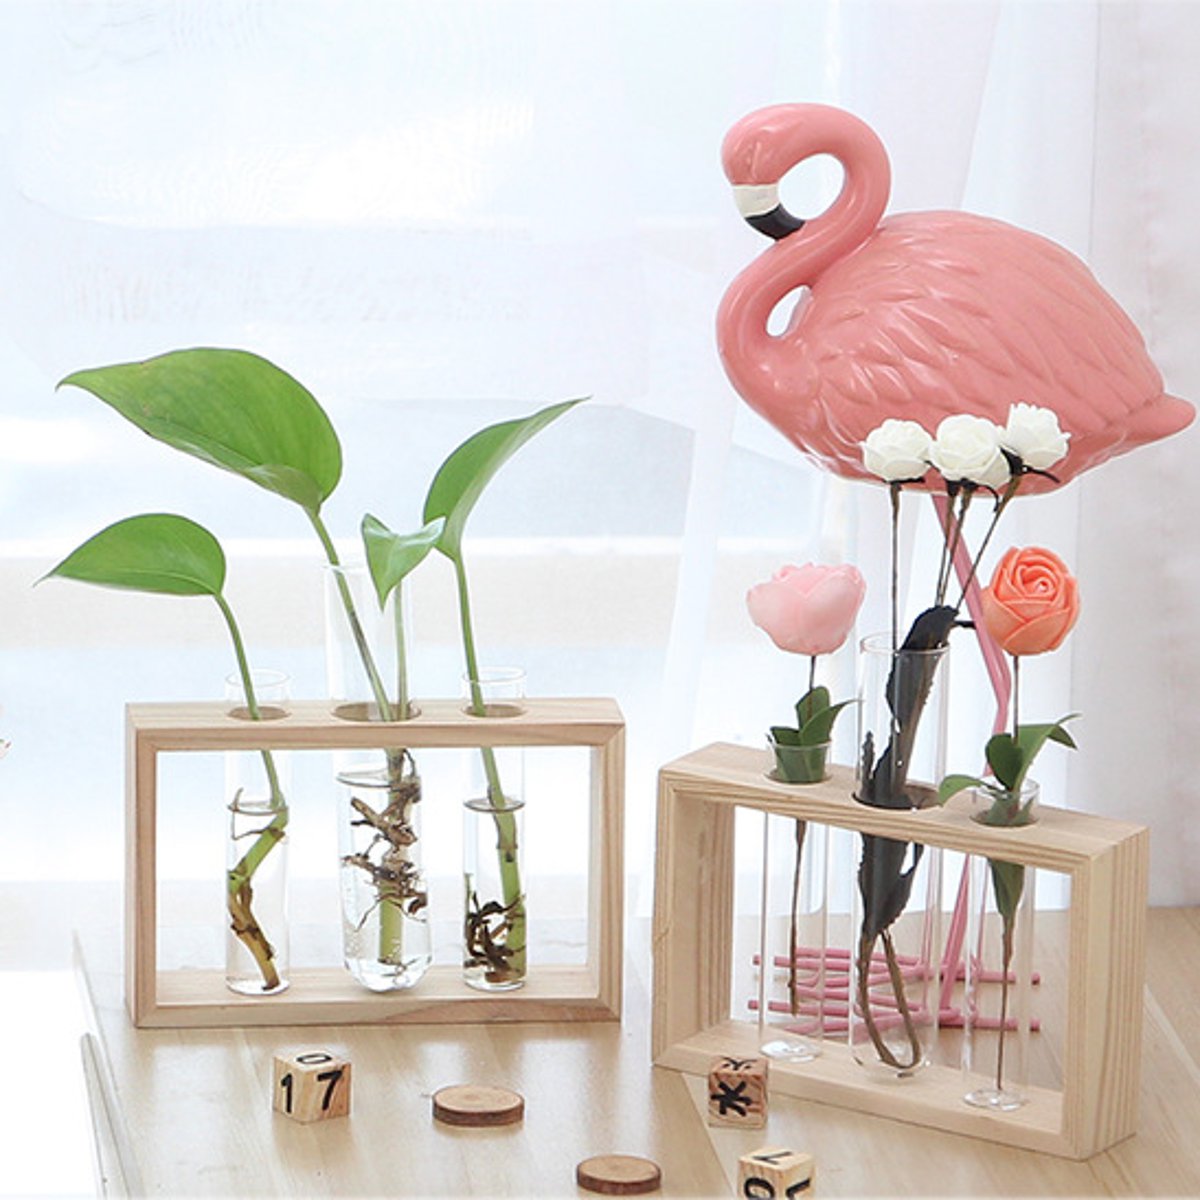 

Glass Test Tube Vase Bottle in Wooden Stand for Plant Flowers Terrarium Decorations